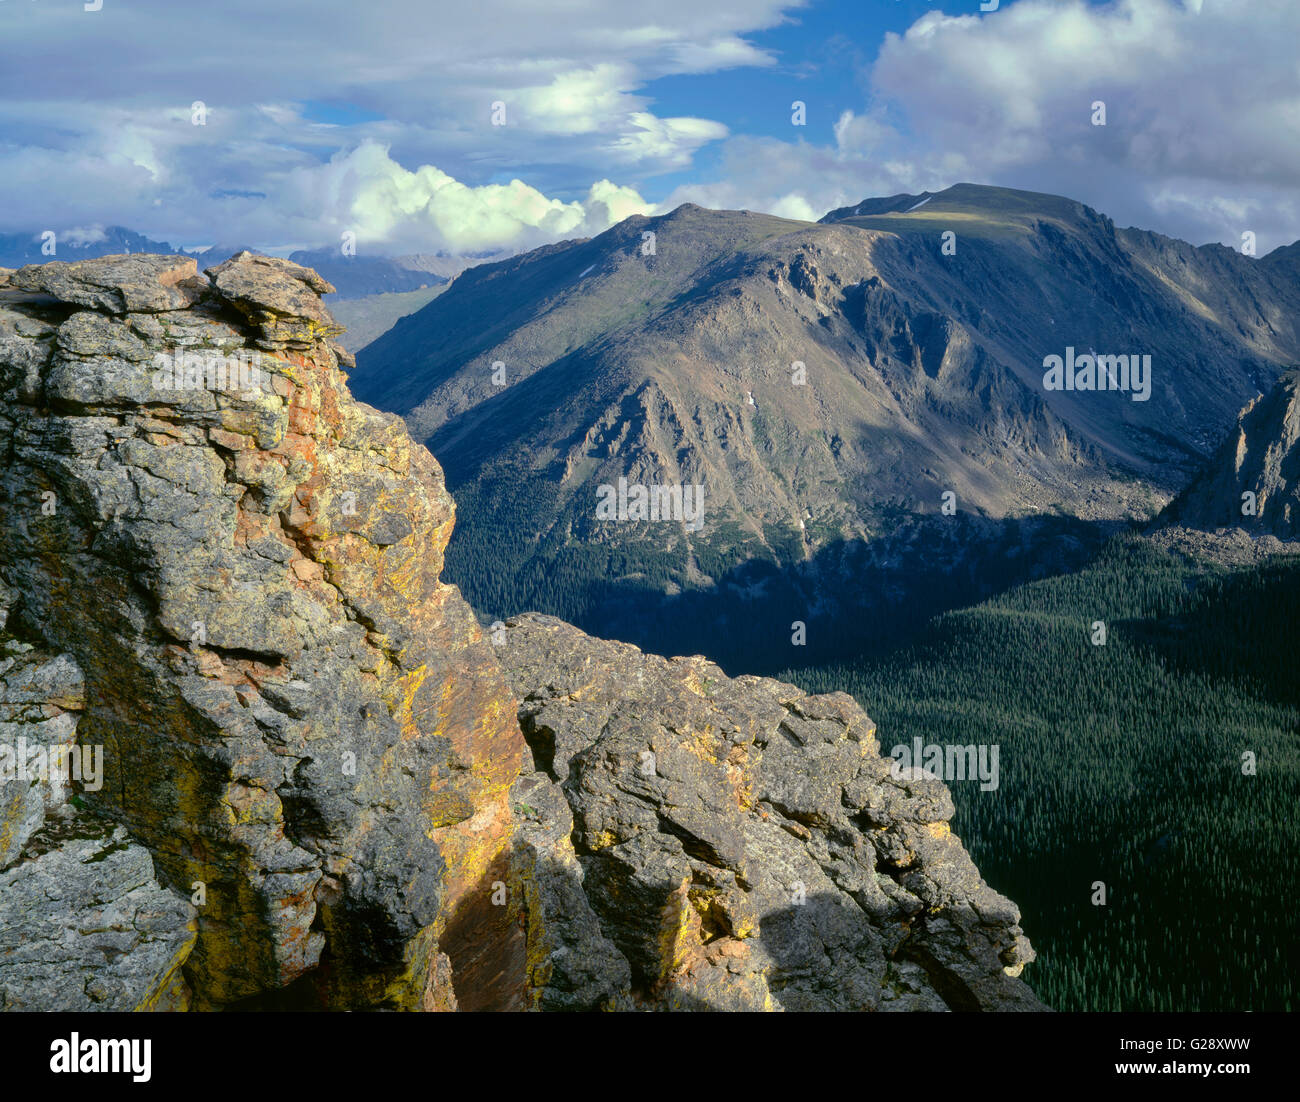 USA, Colorado, Rocky Mountain National Park, Lichen covered rocks at Rock Cut with distant Stones Peak above conifers. Stock Photo